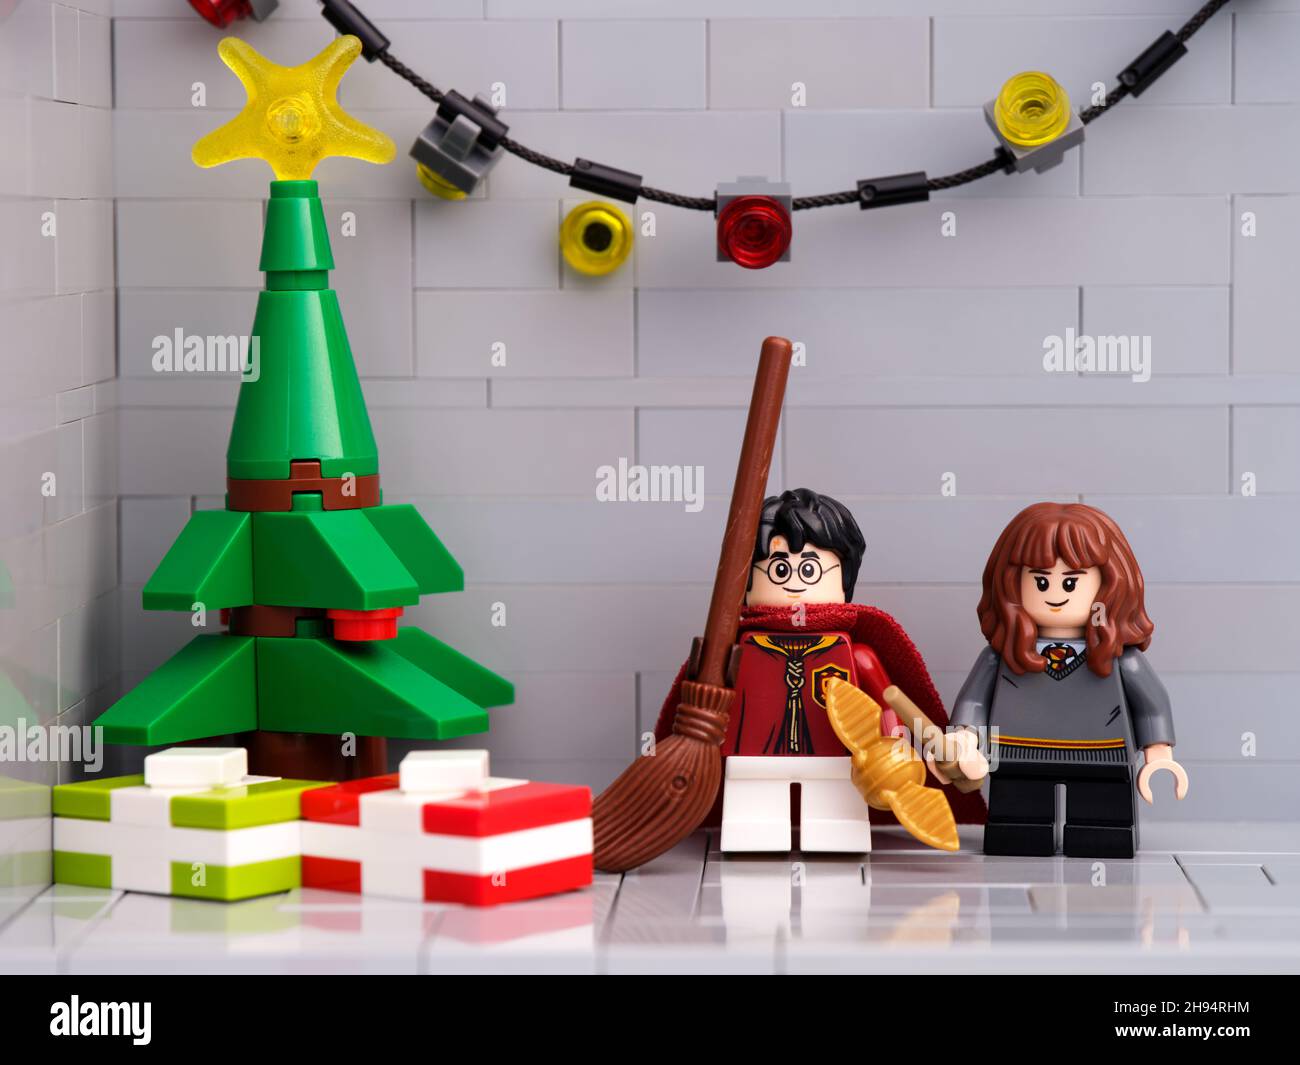 Tambov, Russian Federation - December 01, 2021 Lego Harry Potter and Hermione Granger minifigures standing near a Christmas tree with present Stock Photo